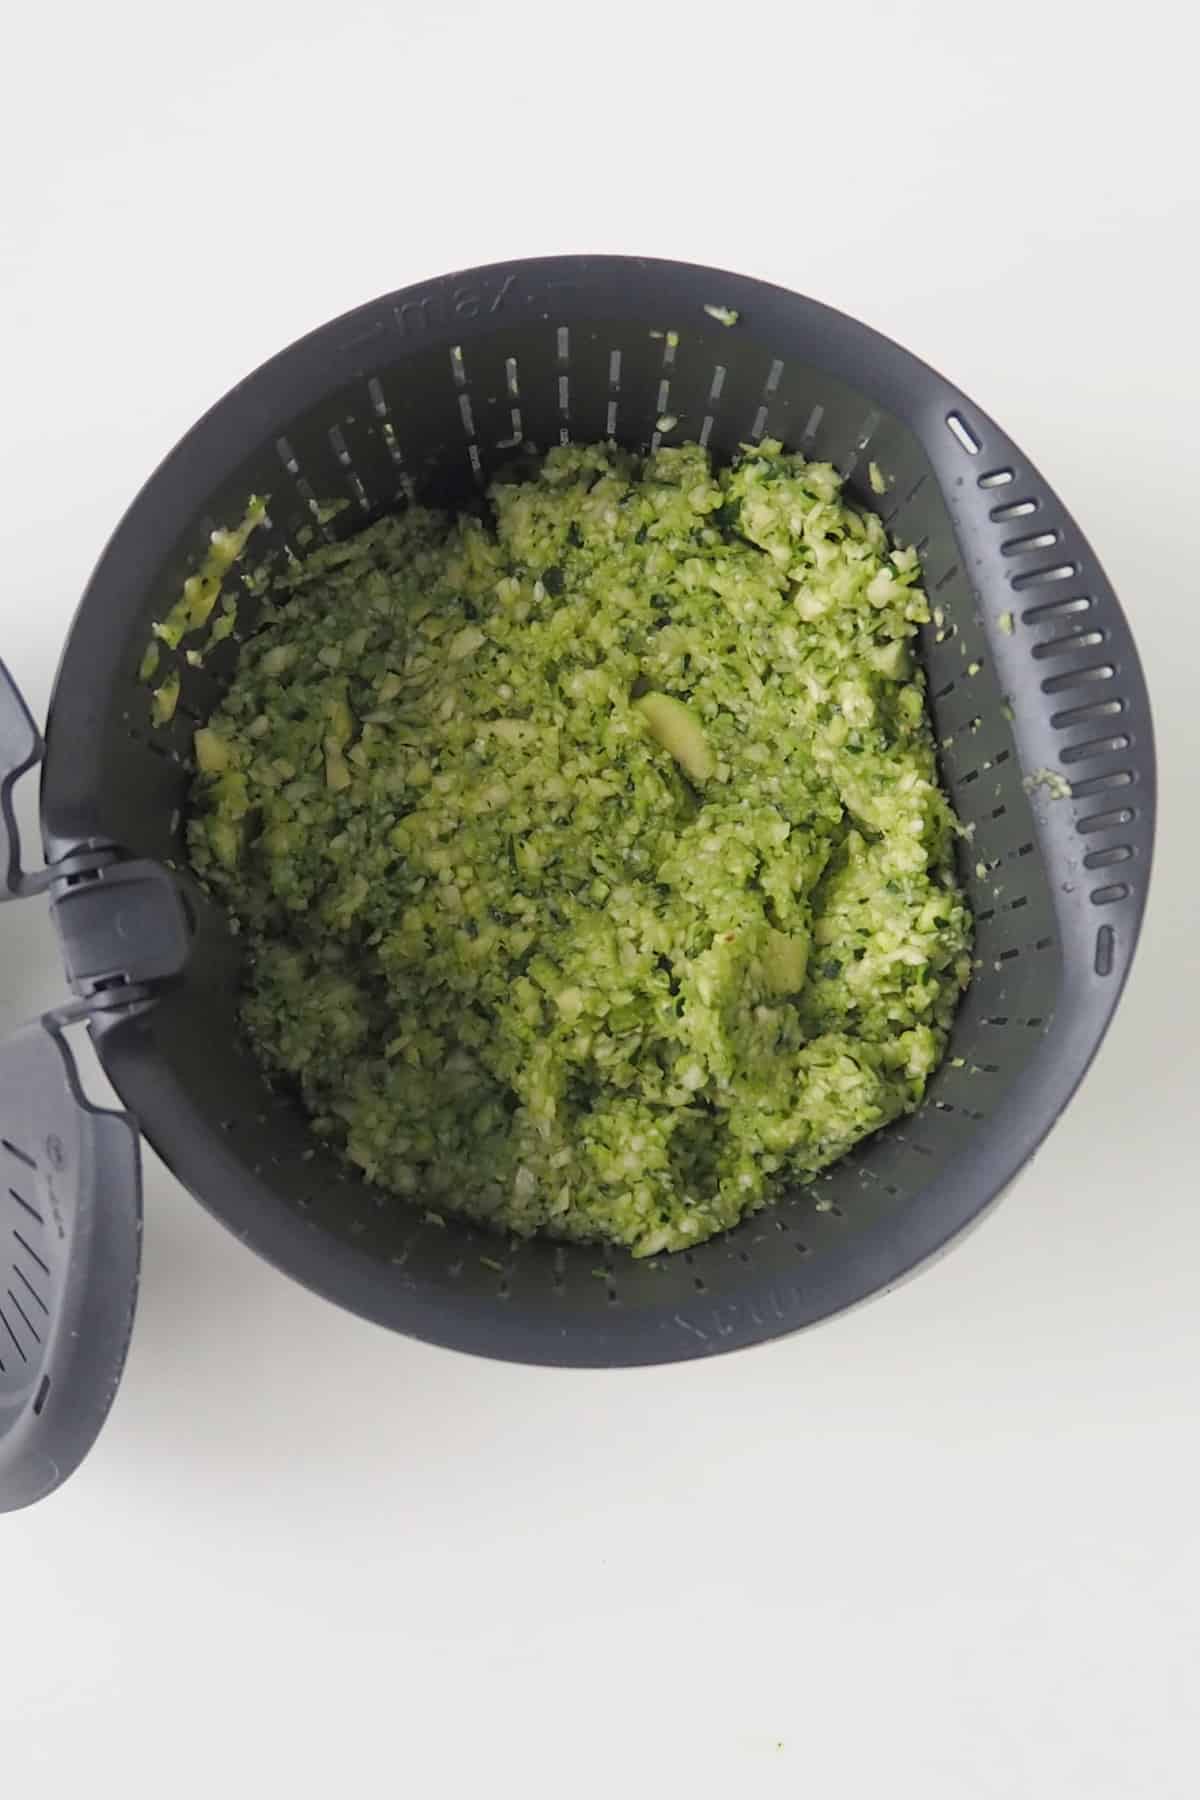 Grated zucchini draining in a thermomix basket.